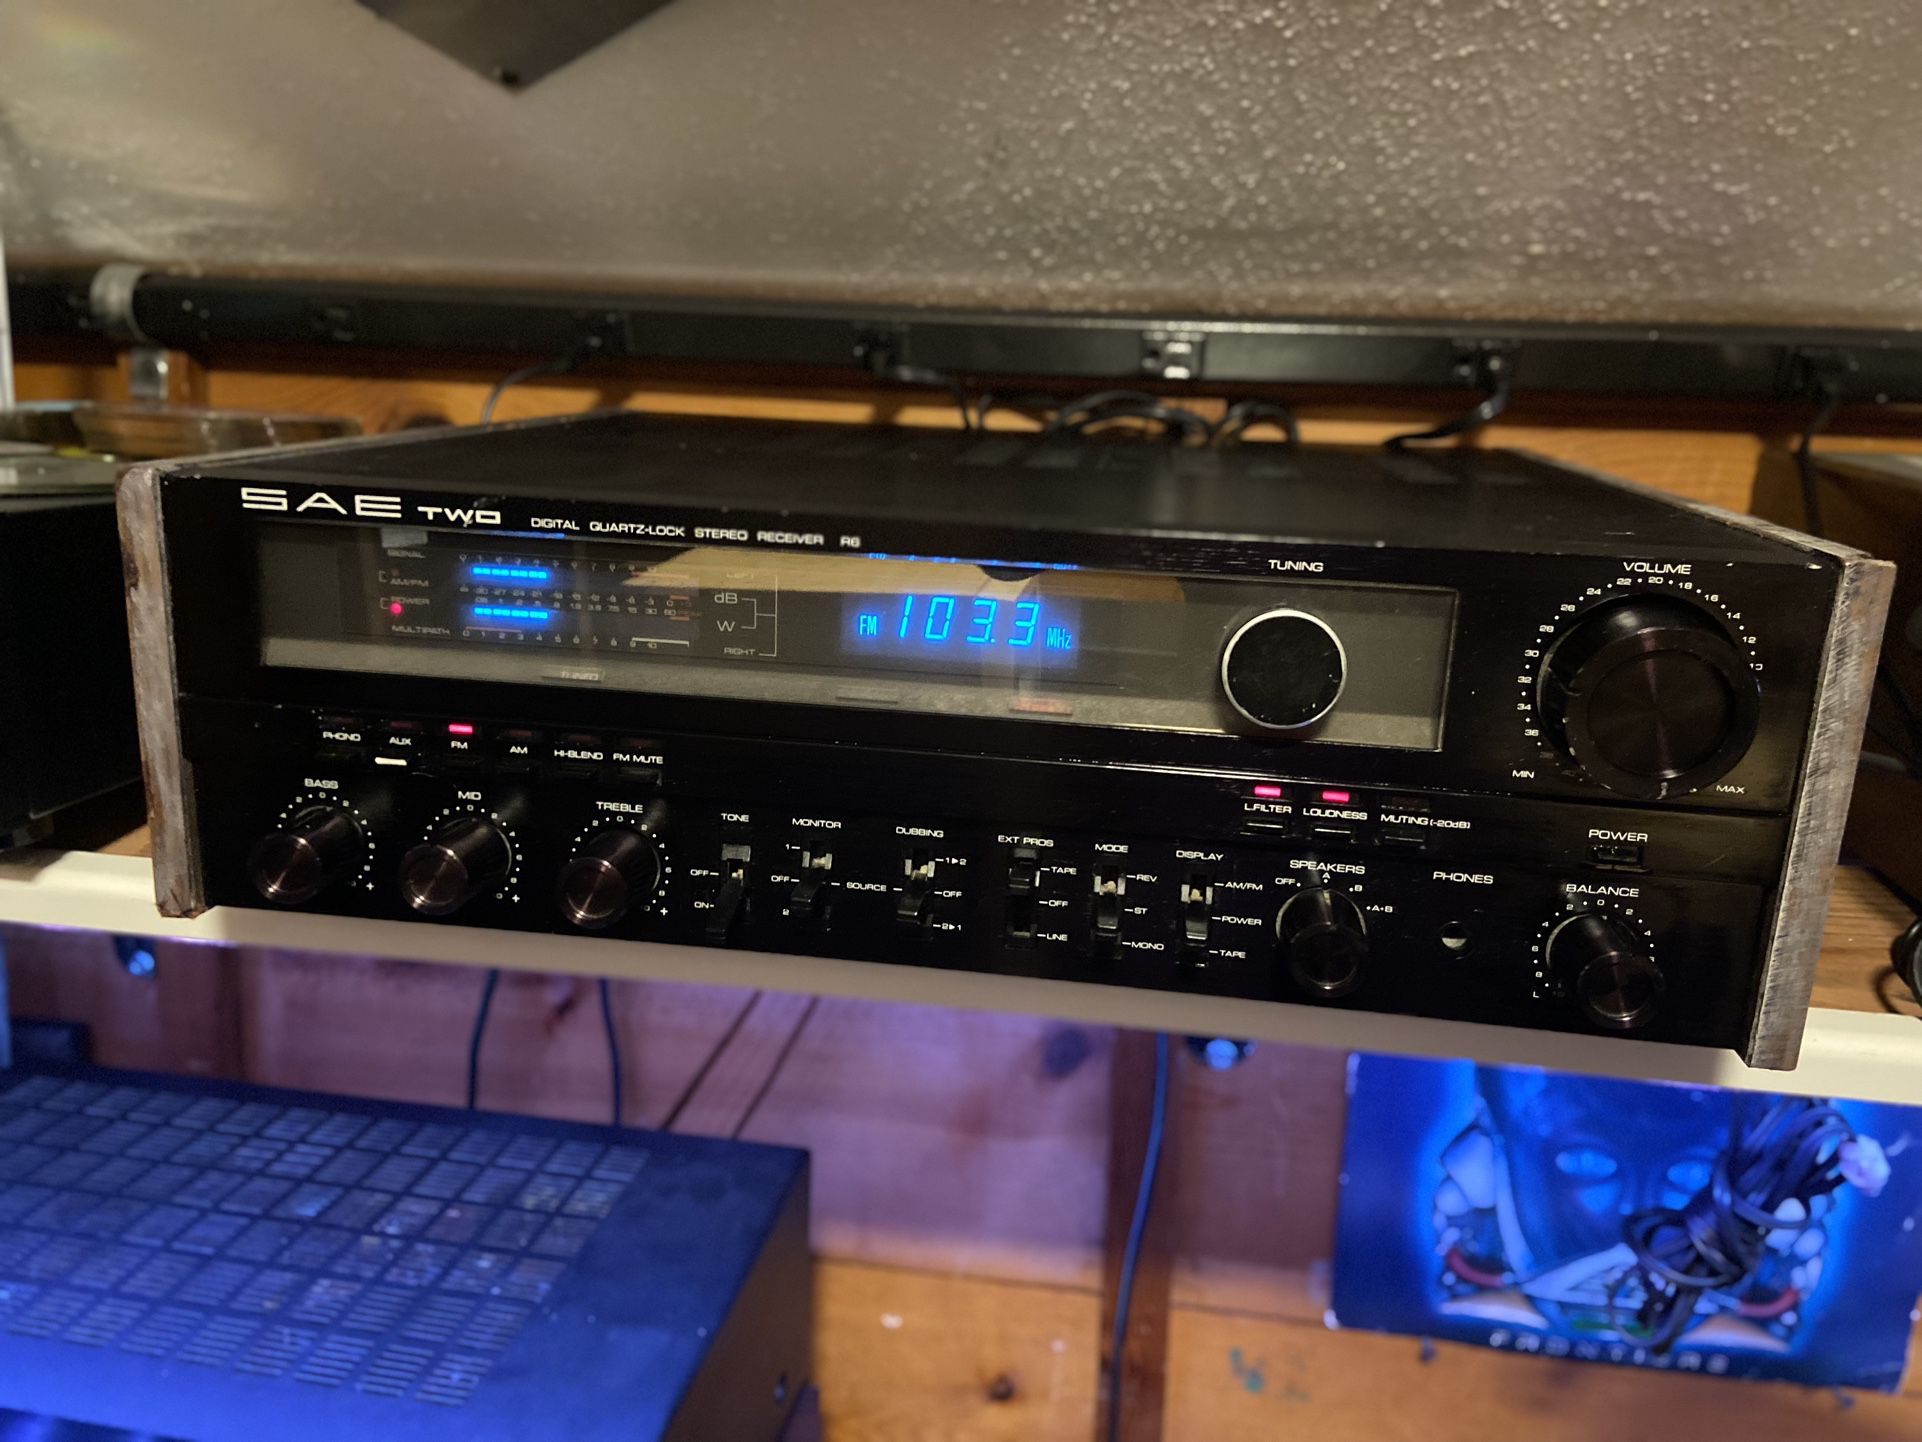 SAE TWO Stereo Receiver R6